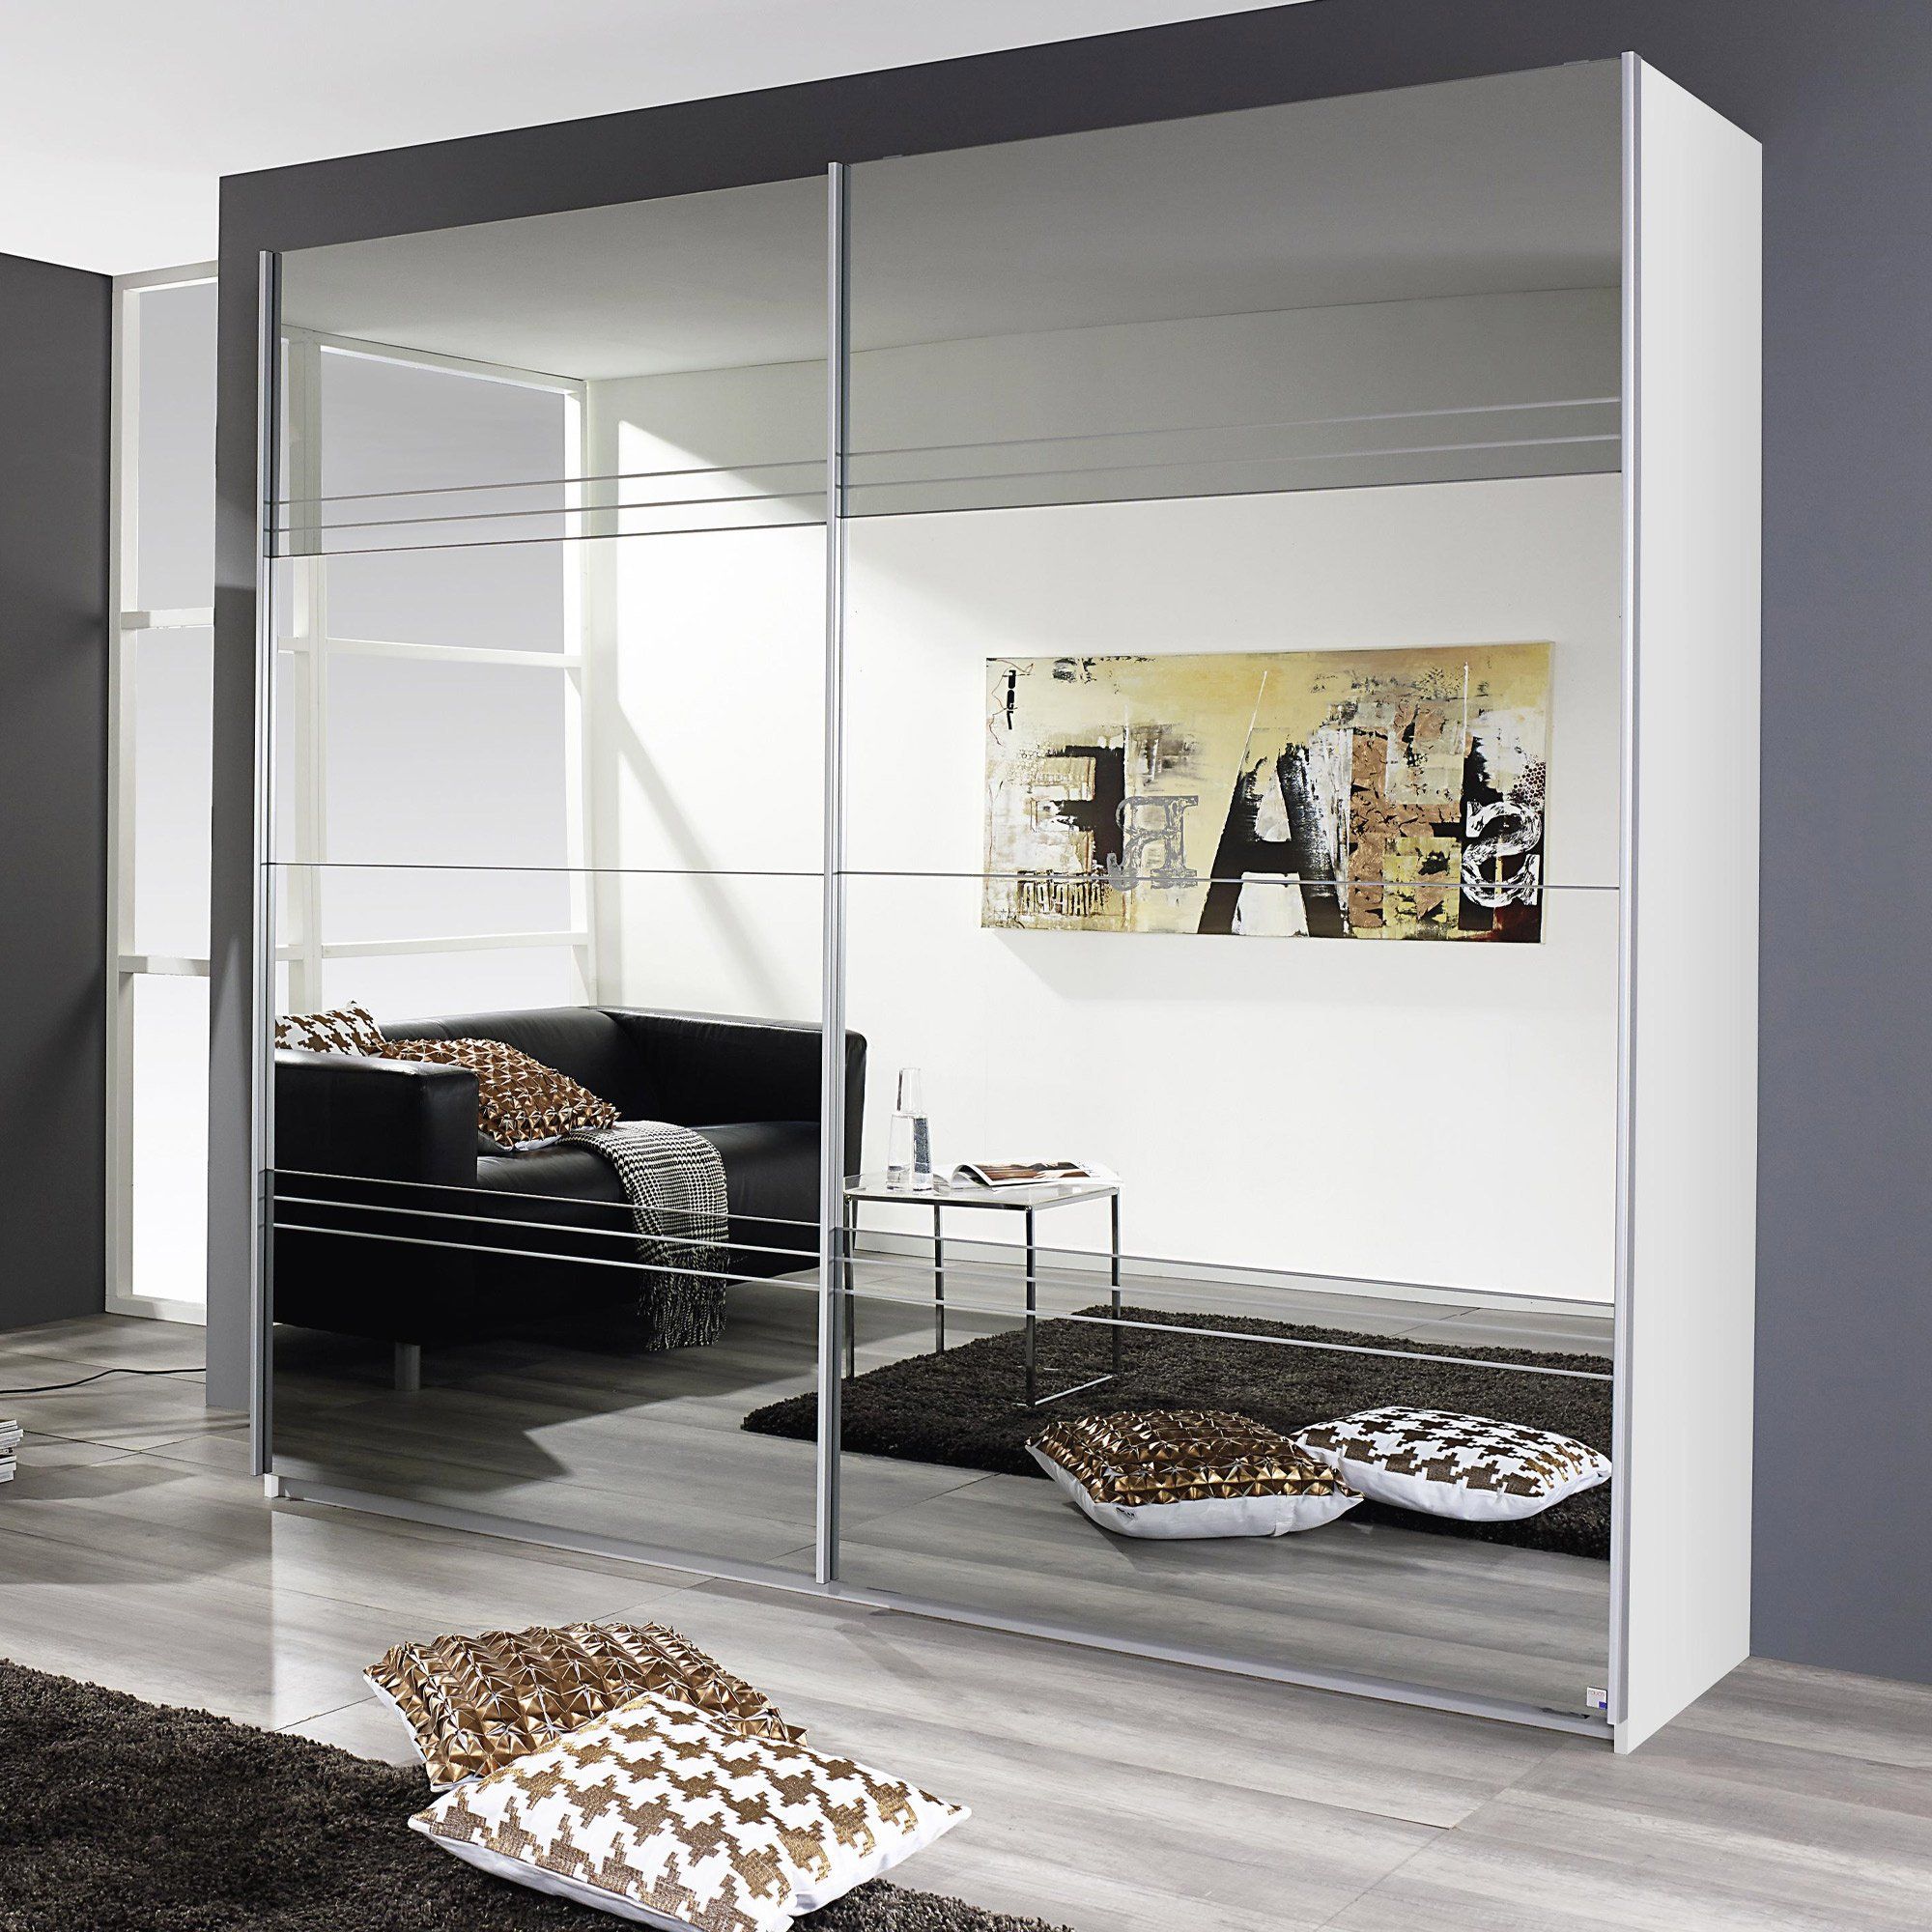 White Cleo Mirrored Door Gliding Door Wardrobe Intended For Cheap Wardrobes With Mirrors (View 2 of 15)